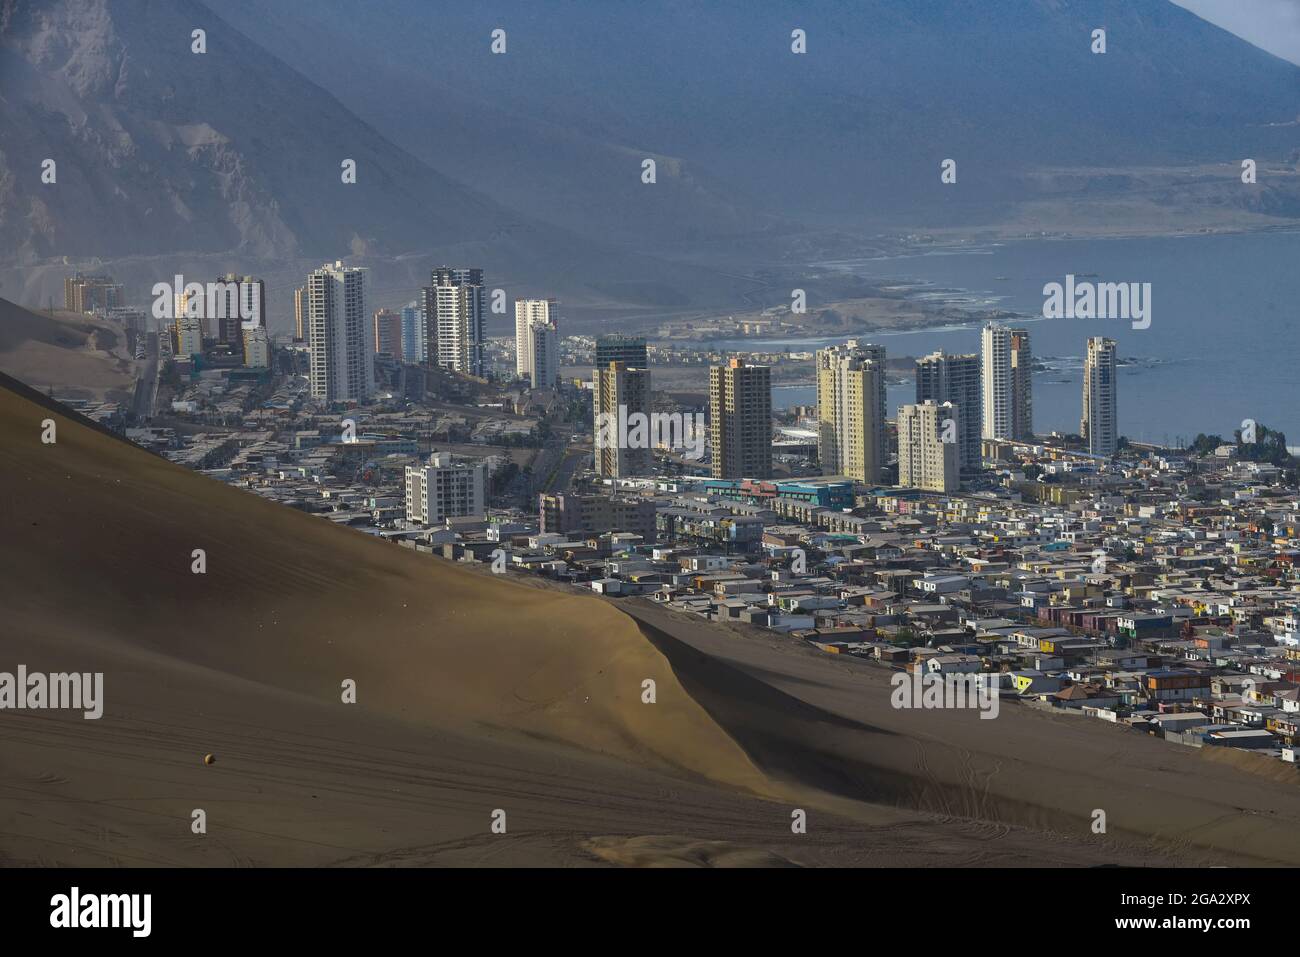 South part of the port city of Iquique with skyline and Cerro Dragon (Dragon Hill) the large, urban sand dune that overlooks the city Stock Photo